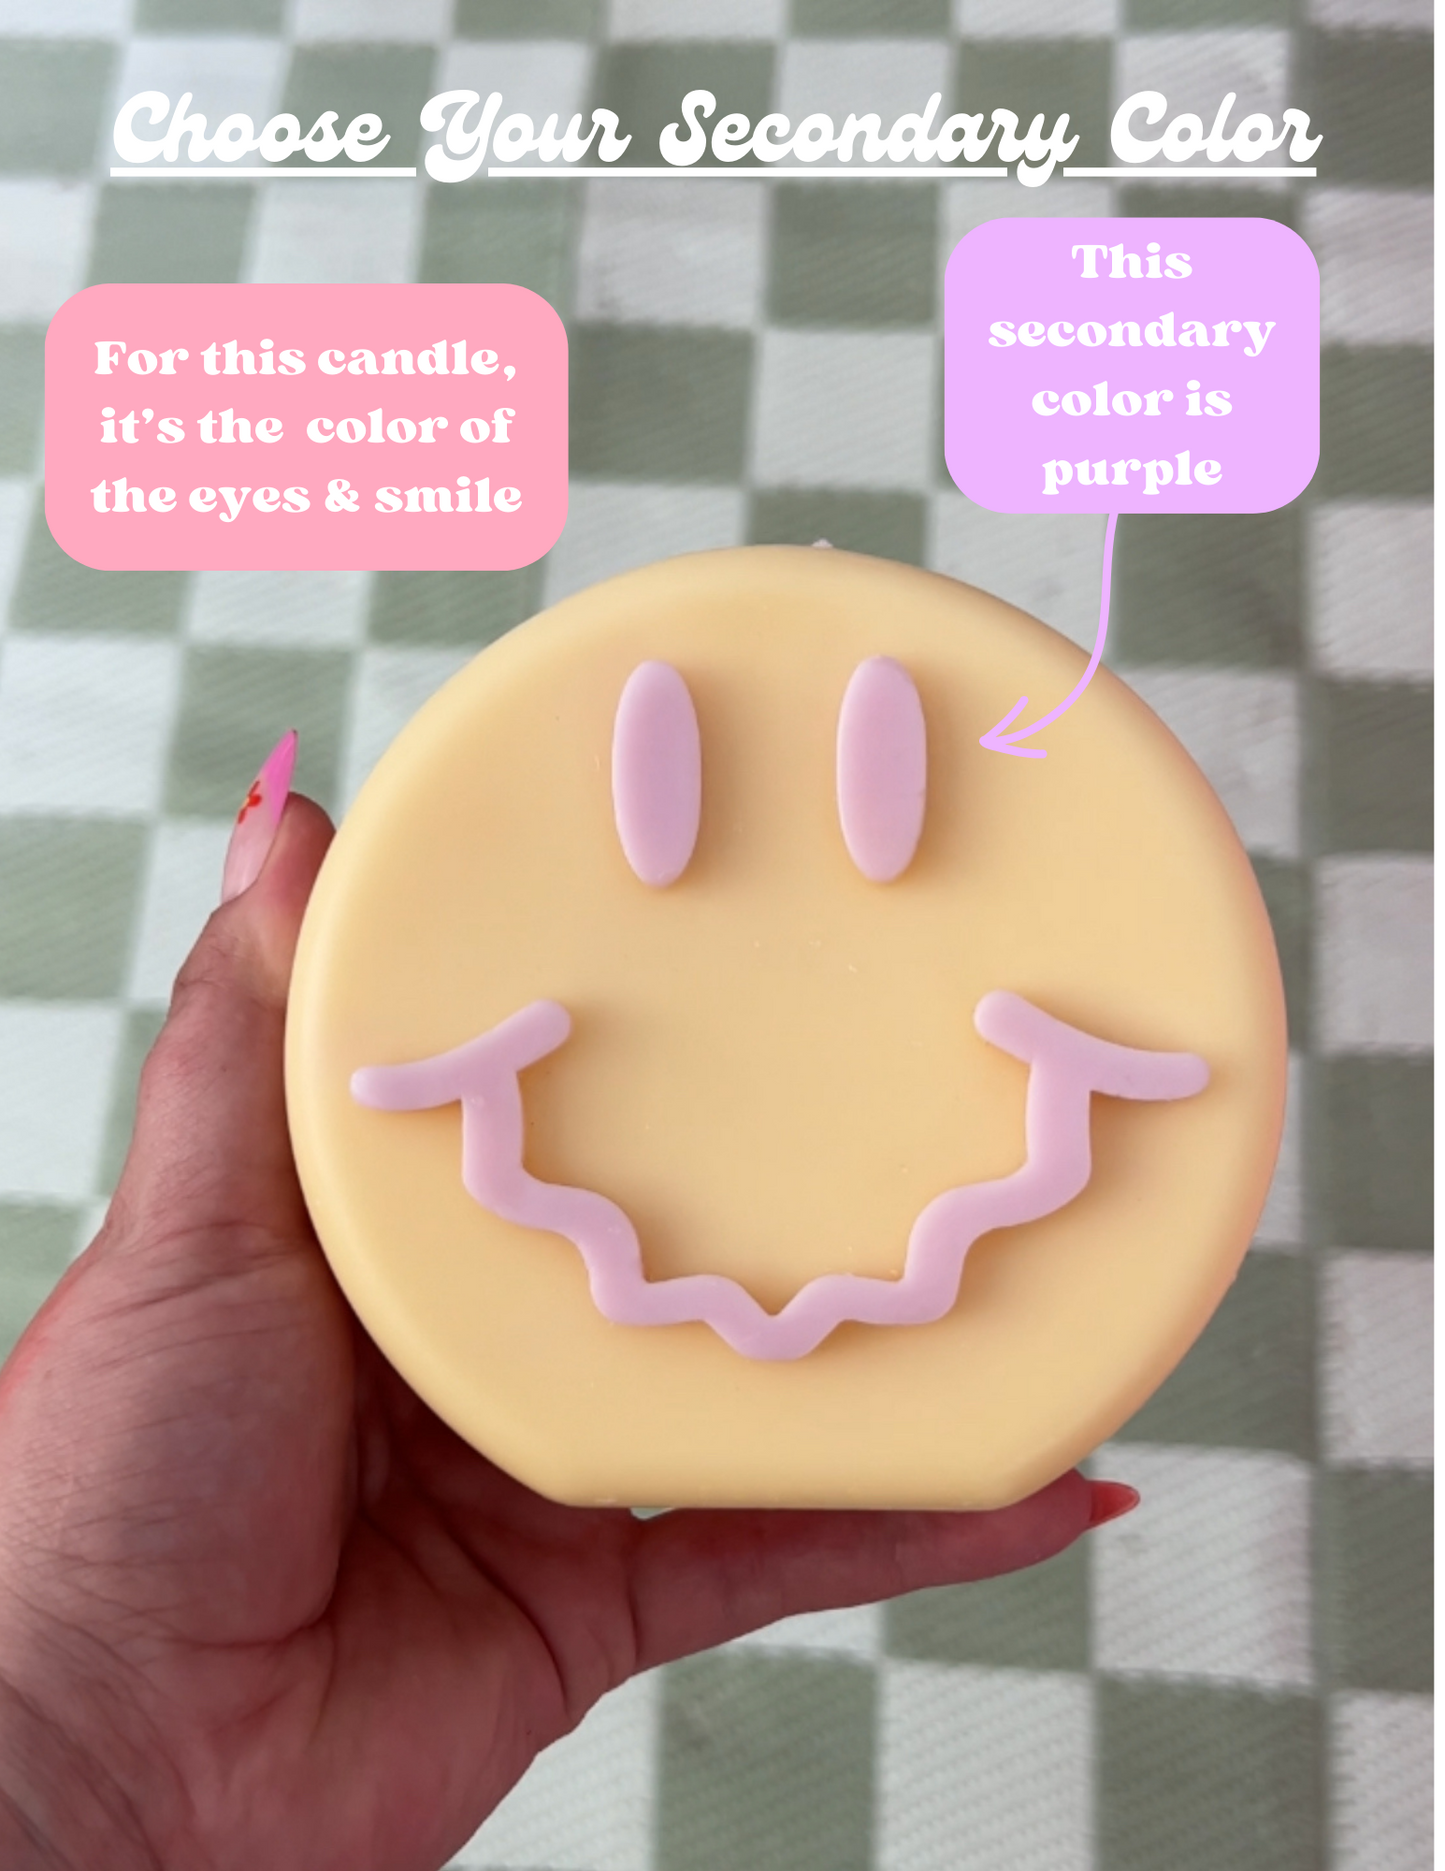 Psychedelic Smiley - Large Two Toned Squiggly Smiley Face Aesthetic Candle